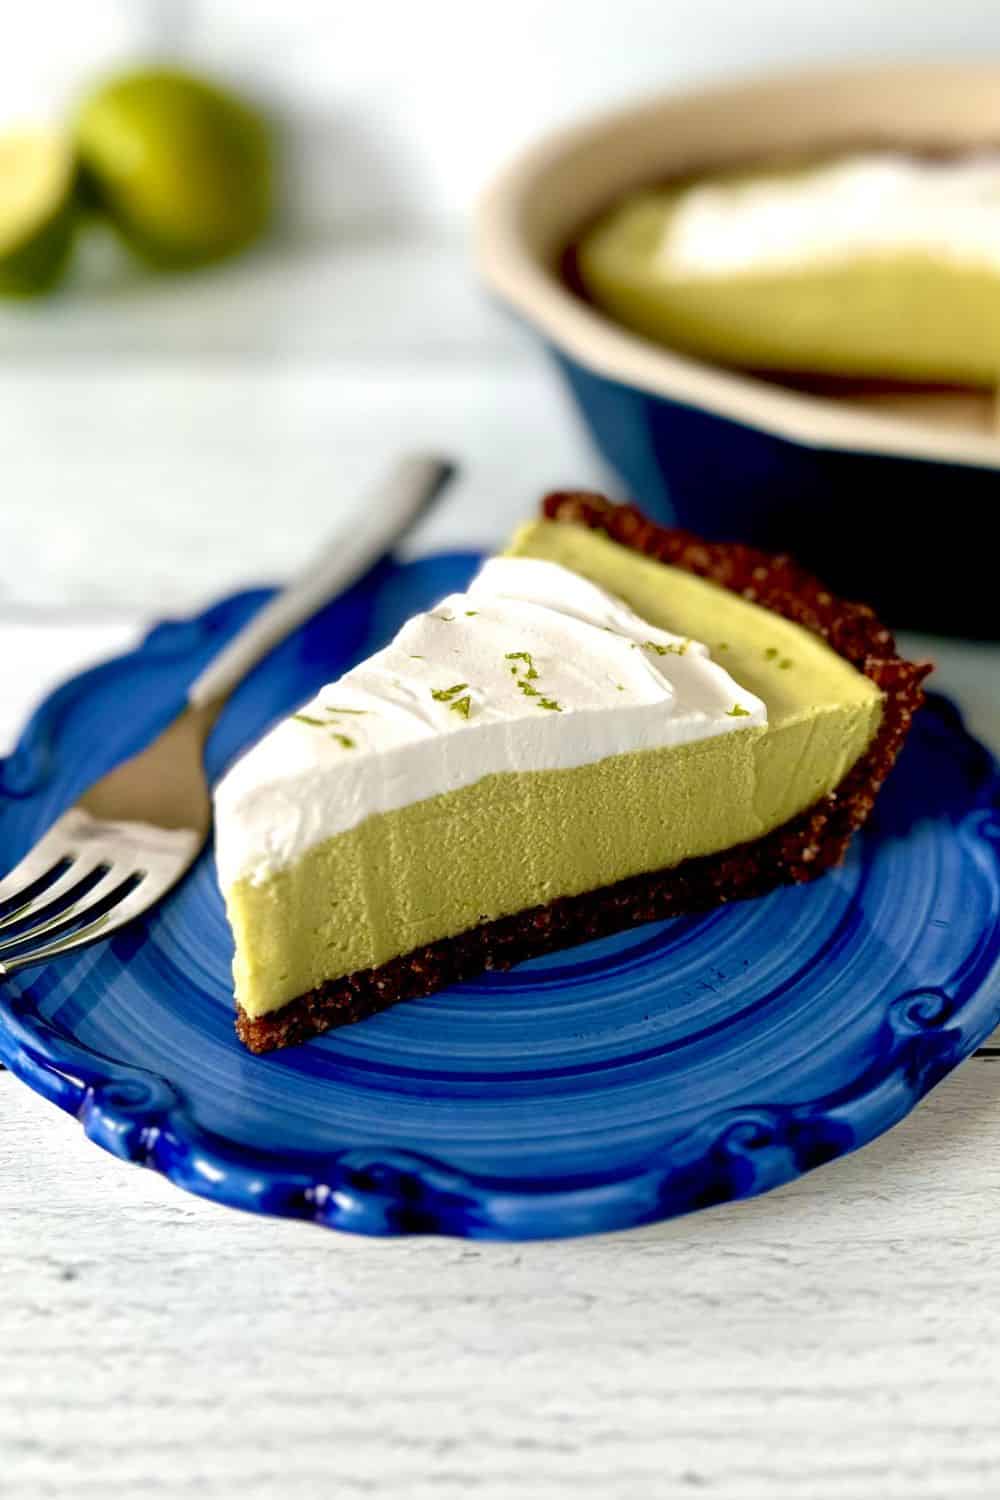 A slice of avocado key lime pie on a blue-swirled plate with a fork.